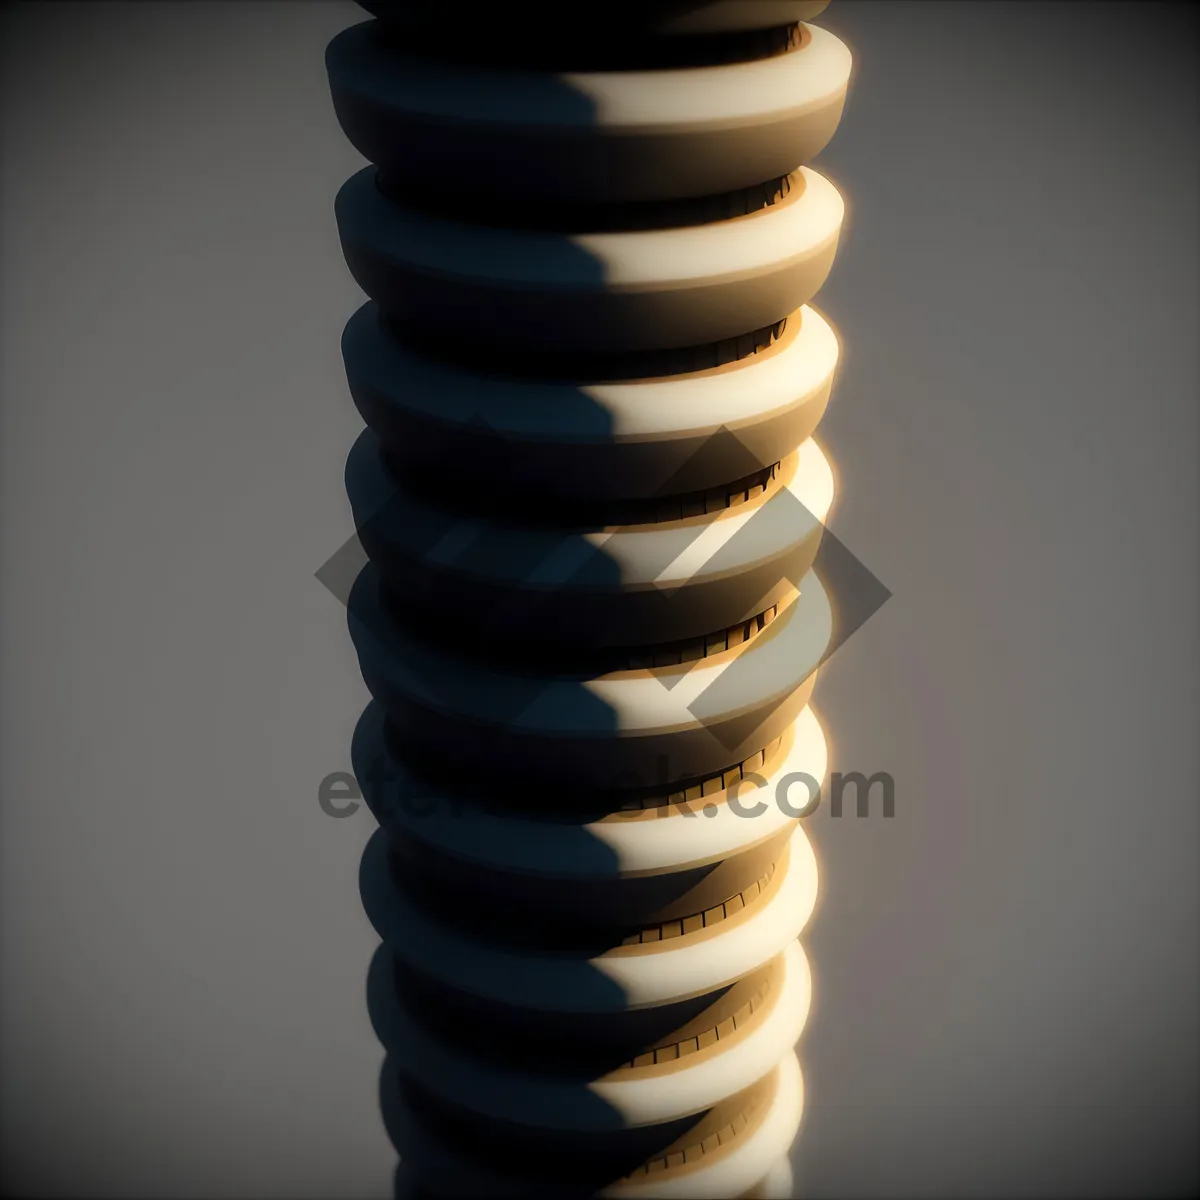 Picture of Elastic Coil Stack: Financial Pebble Spa Stones